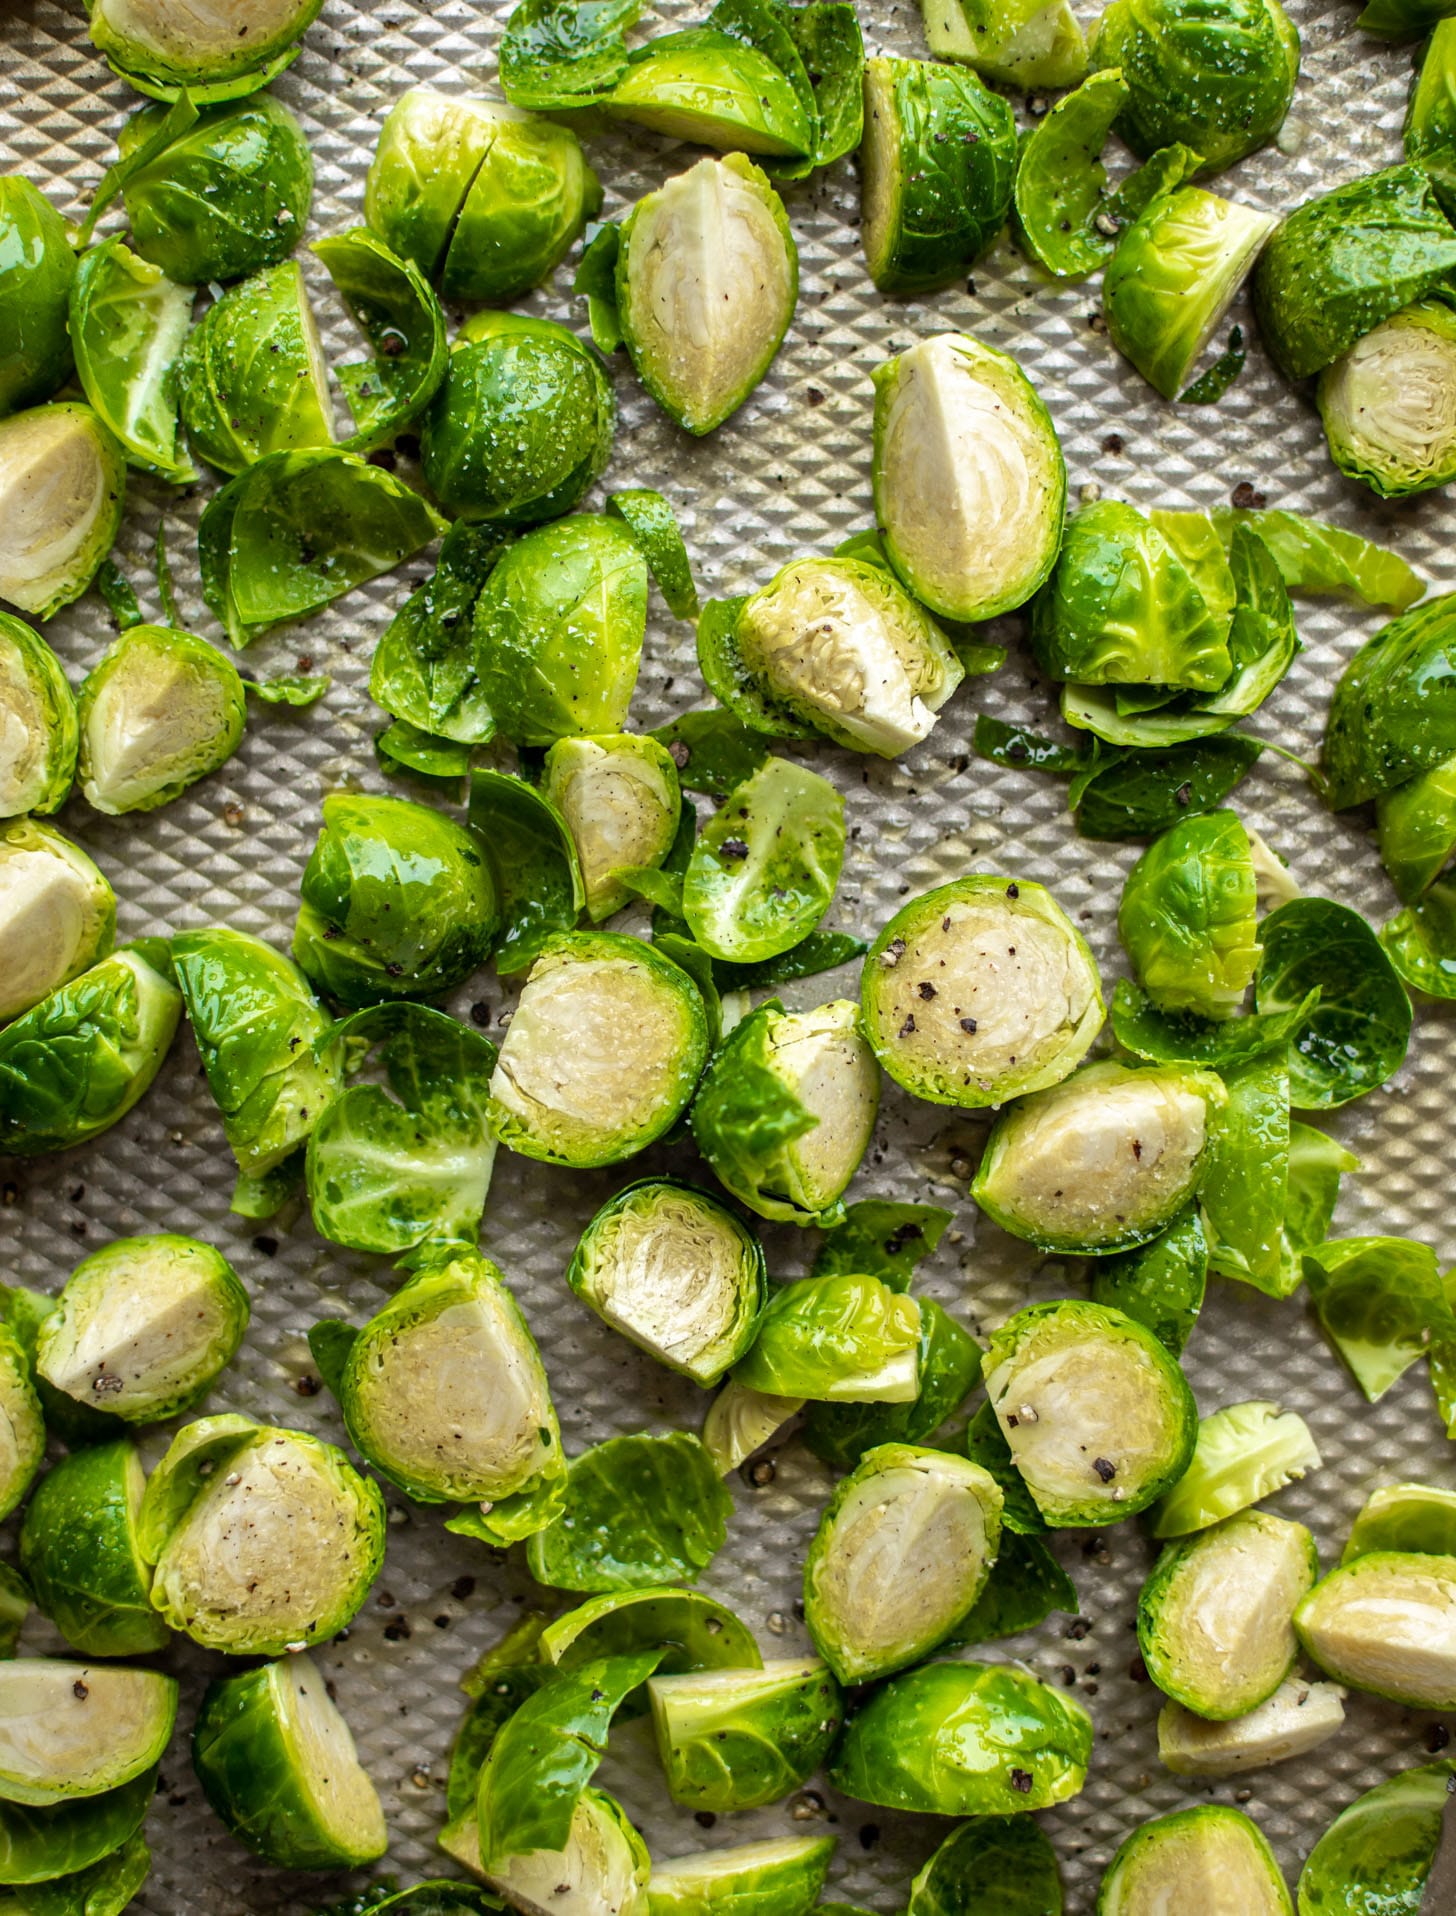 brussels sprouts ready for roasting